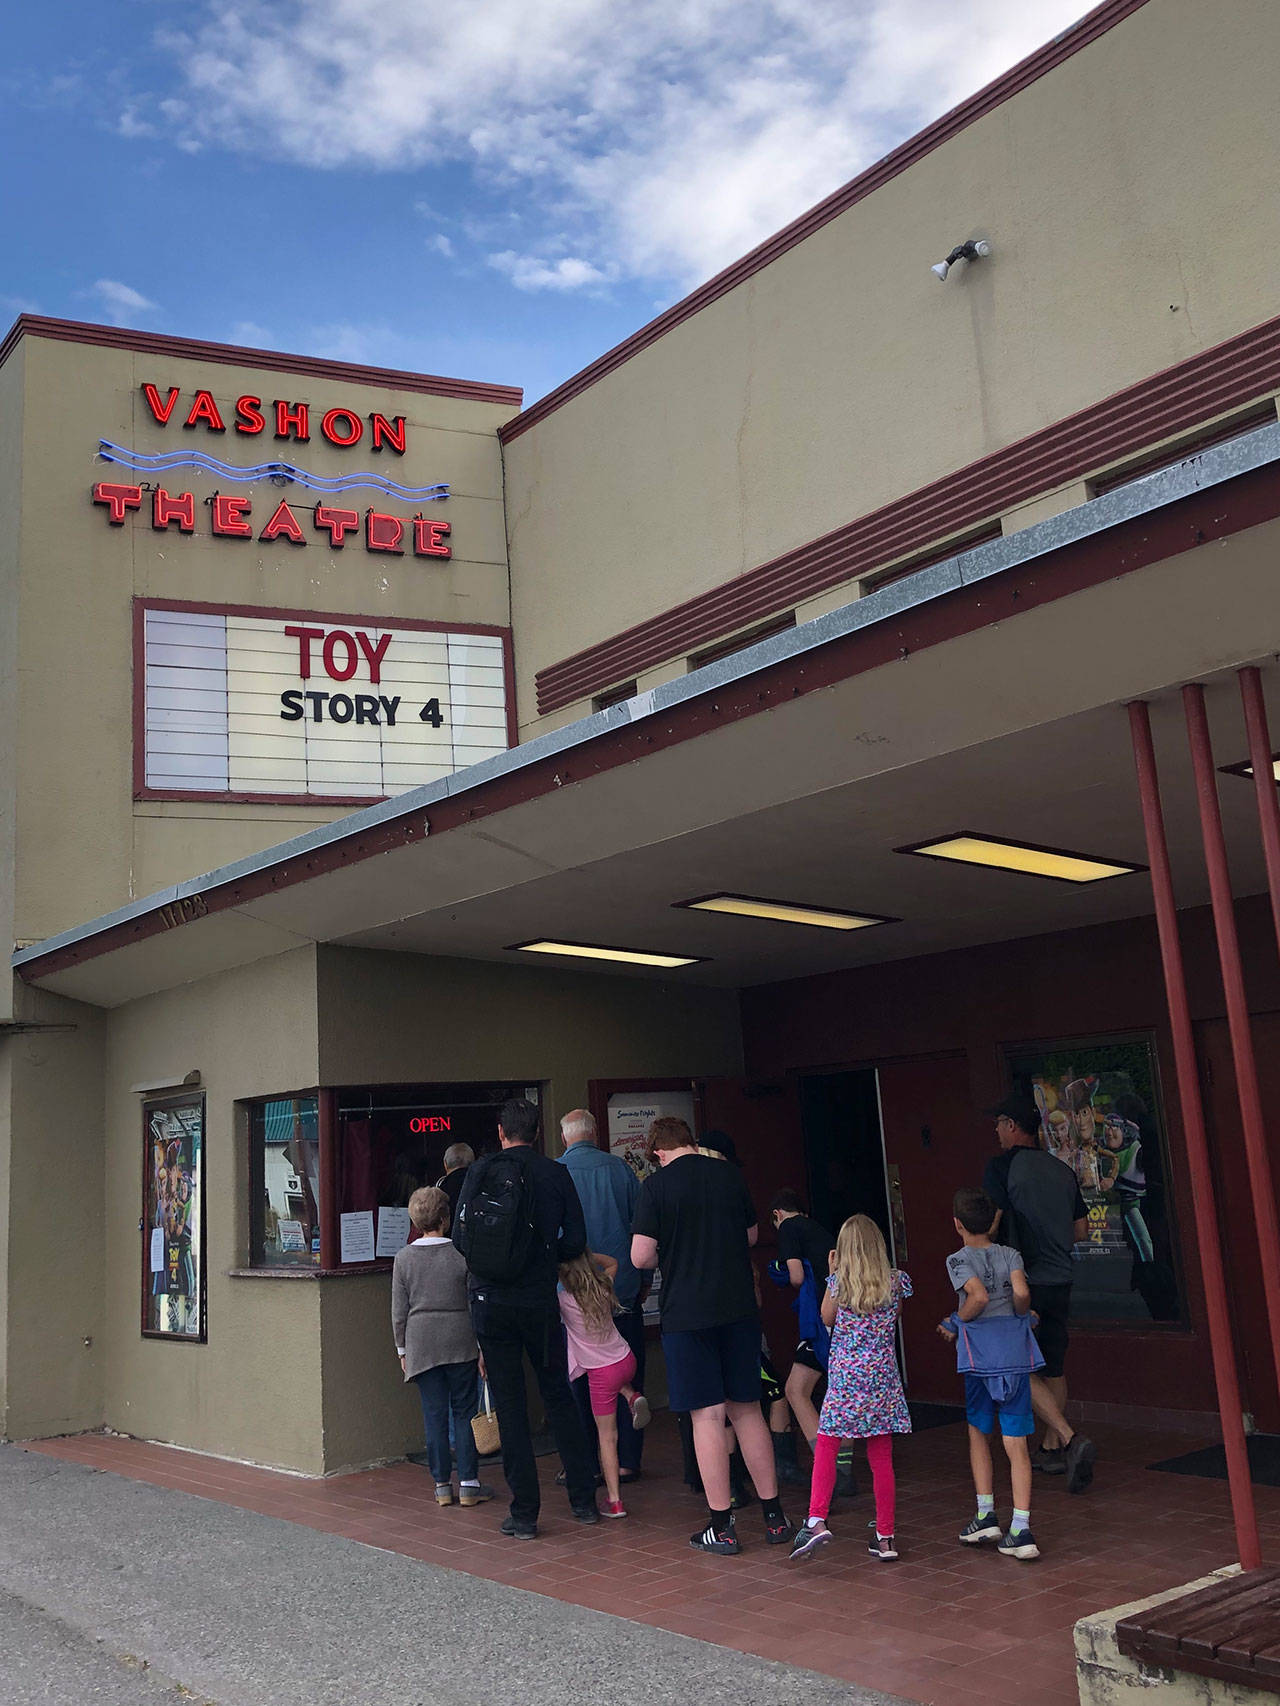 Islanders young and old lined up to buy concessions for one of the first screenings of “Toy Story 4,” now playing at Vashon Theatre (Tom Hughes Photo).